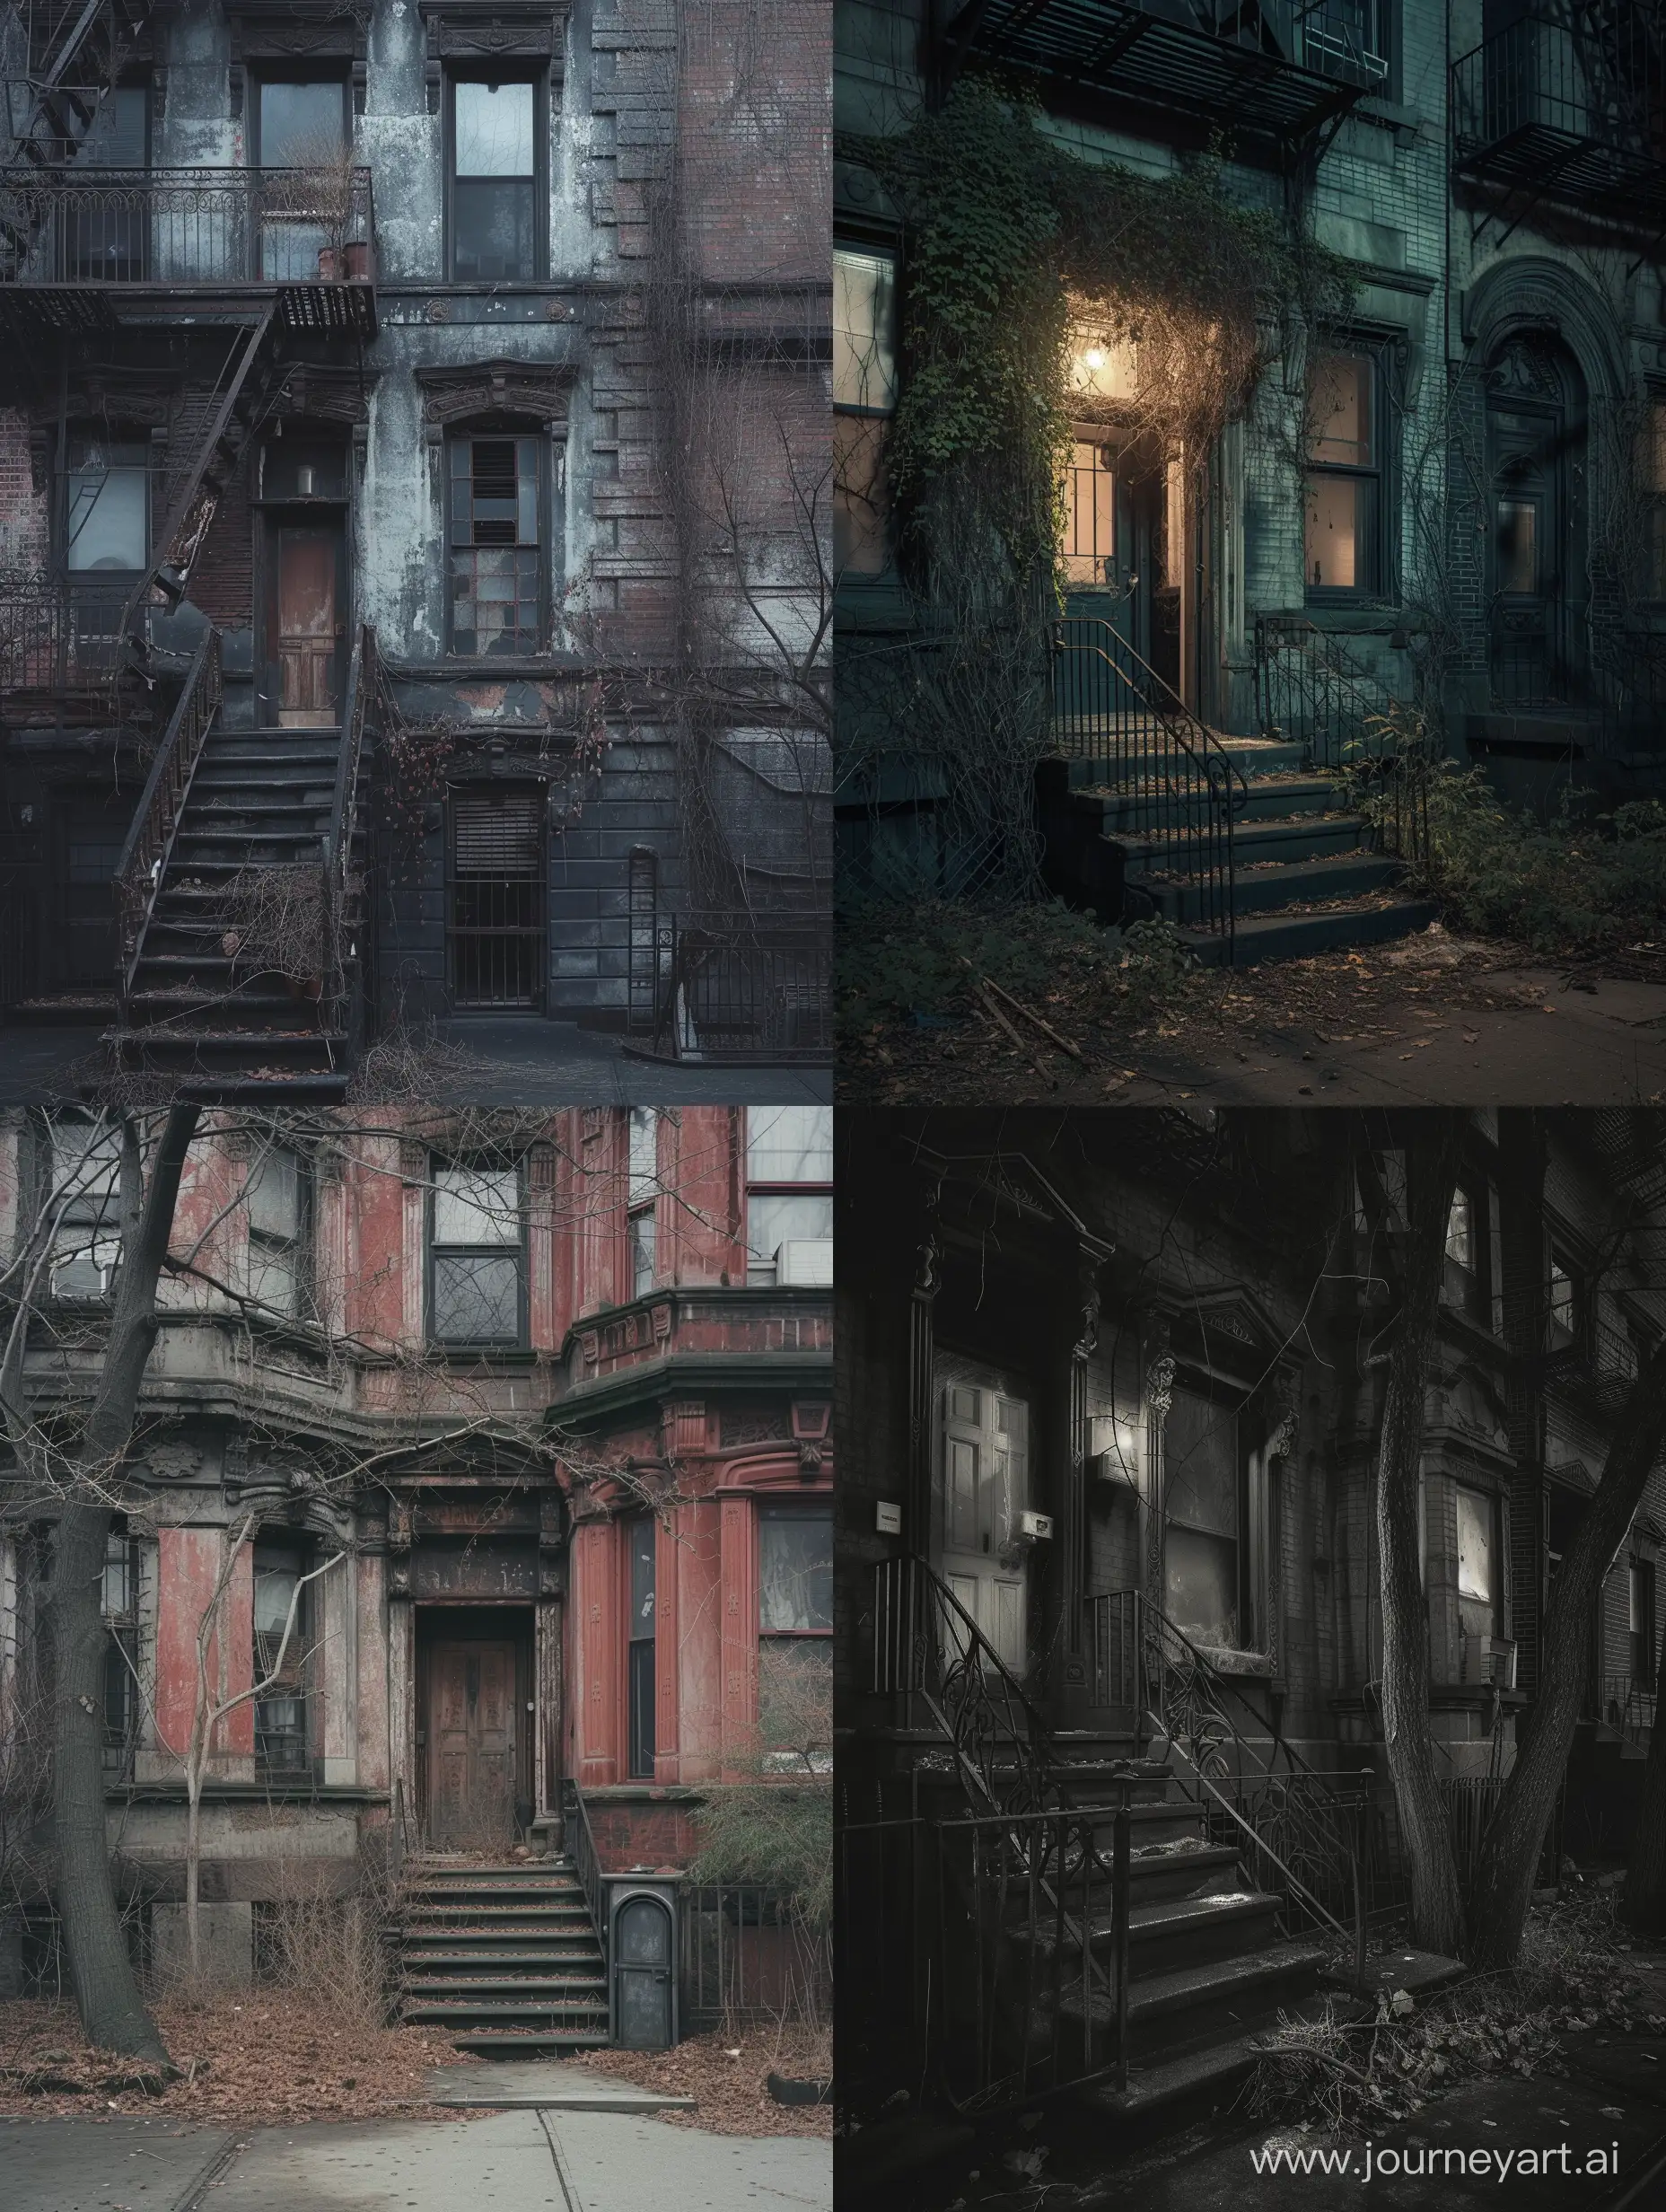 A very spooky looking apartment outside in manhattan, new york city, in the style of a large format film photograph, rundown, not kept well, in the style of sean kozak photographer from brooklyn